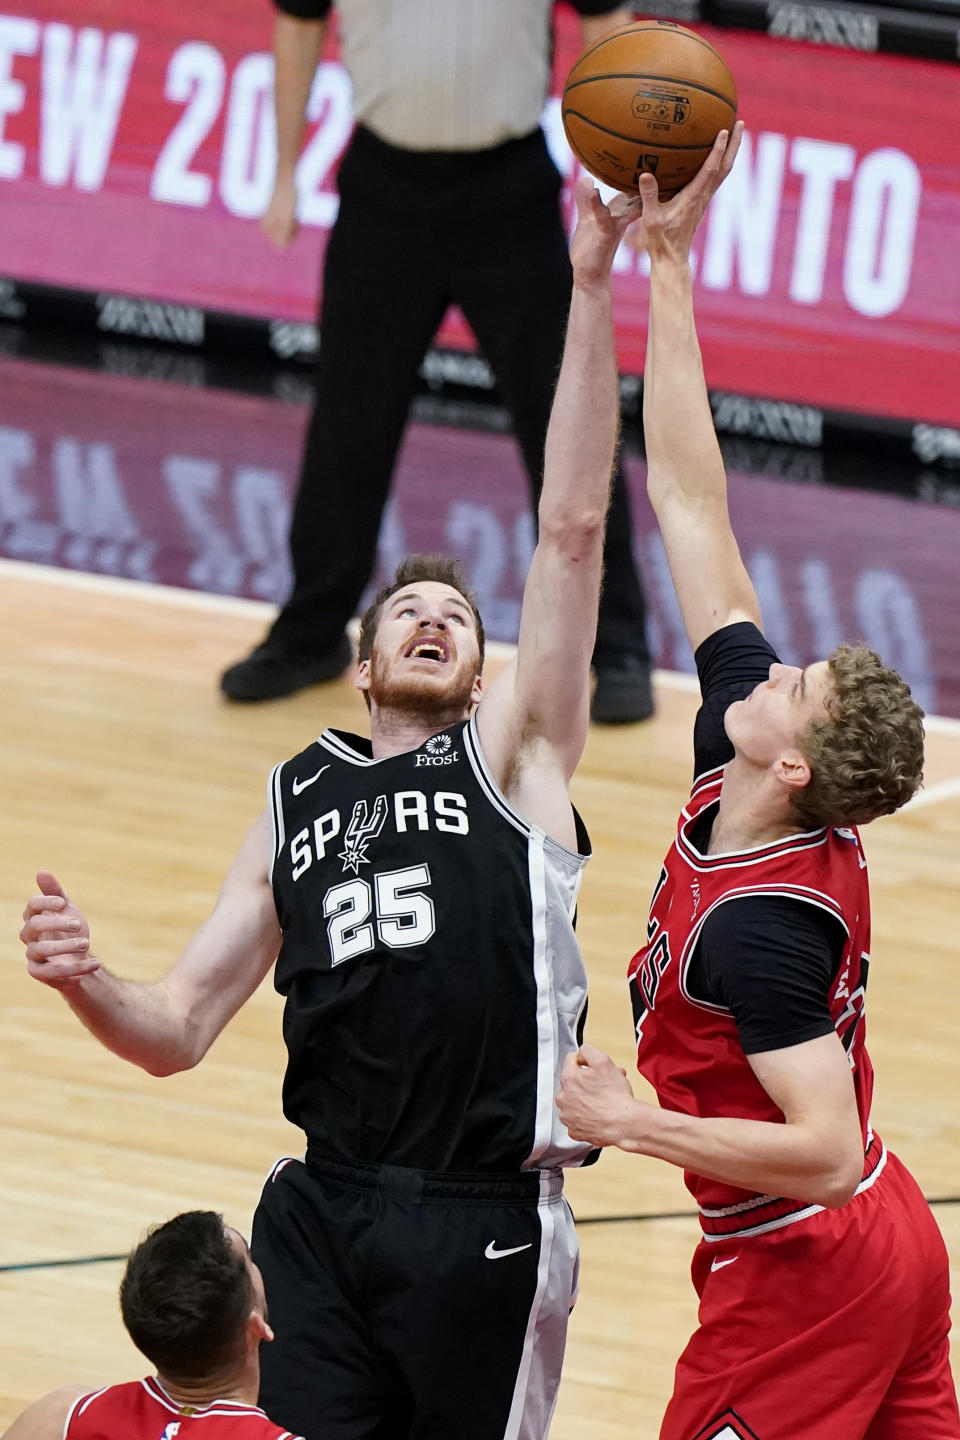 San Antonio Spurs center Jakob Poeltl, left, and Chicago Bulls forward Lauri Markkanen battle for a rebound during the first half of an NBA basketball game in Chicago, Wednesday, March 17, 2021. (AP Photo/Nam Y. Huh)